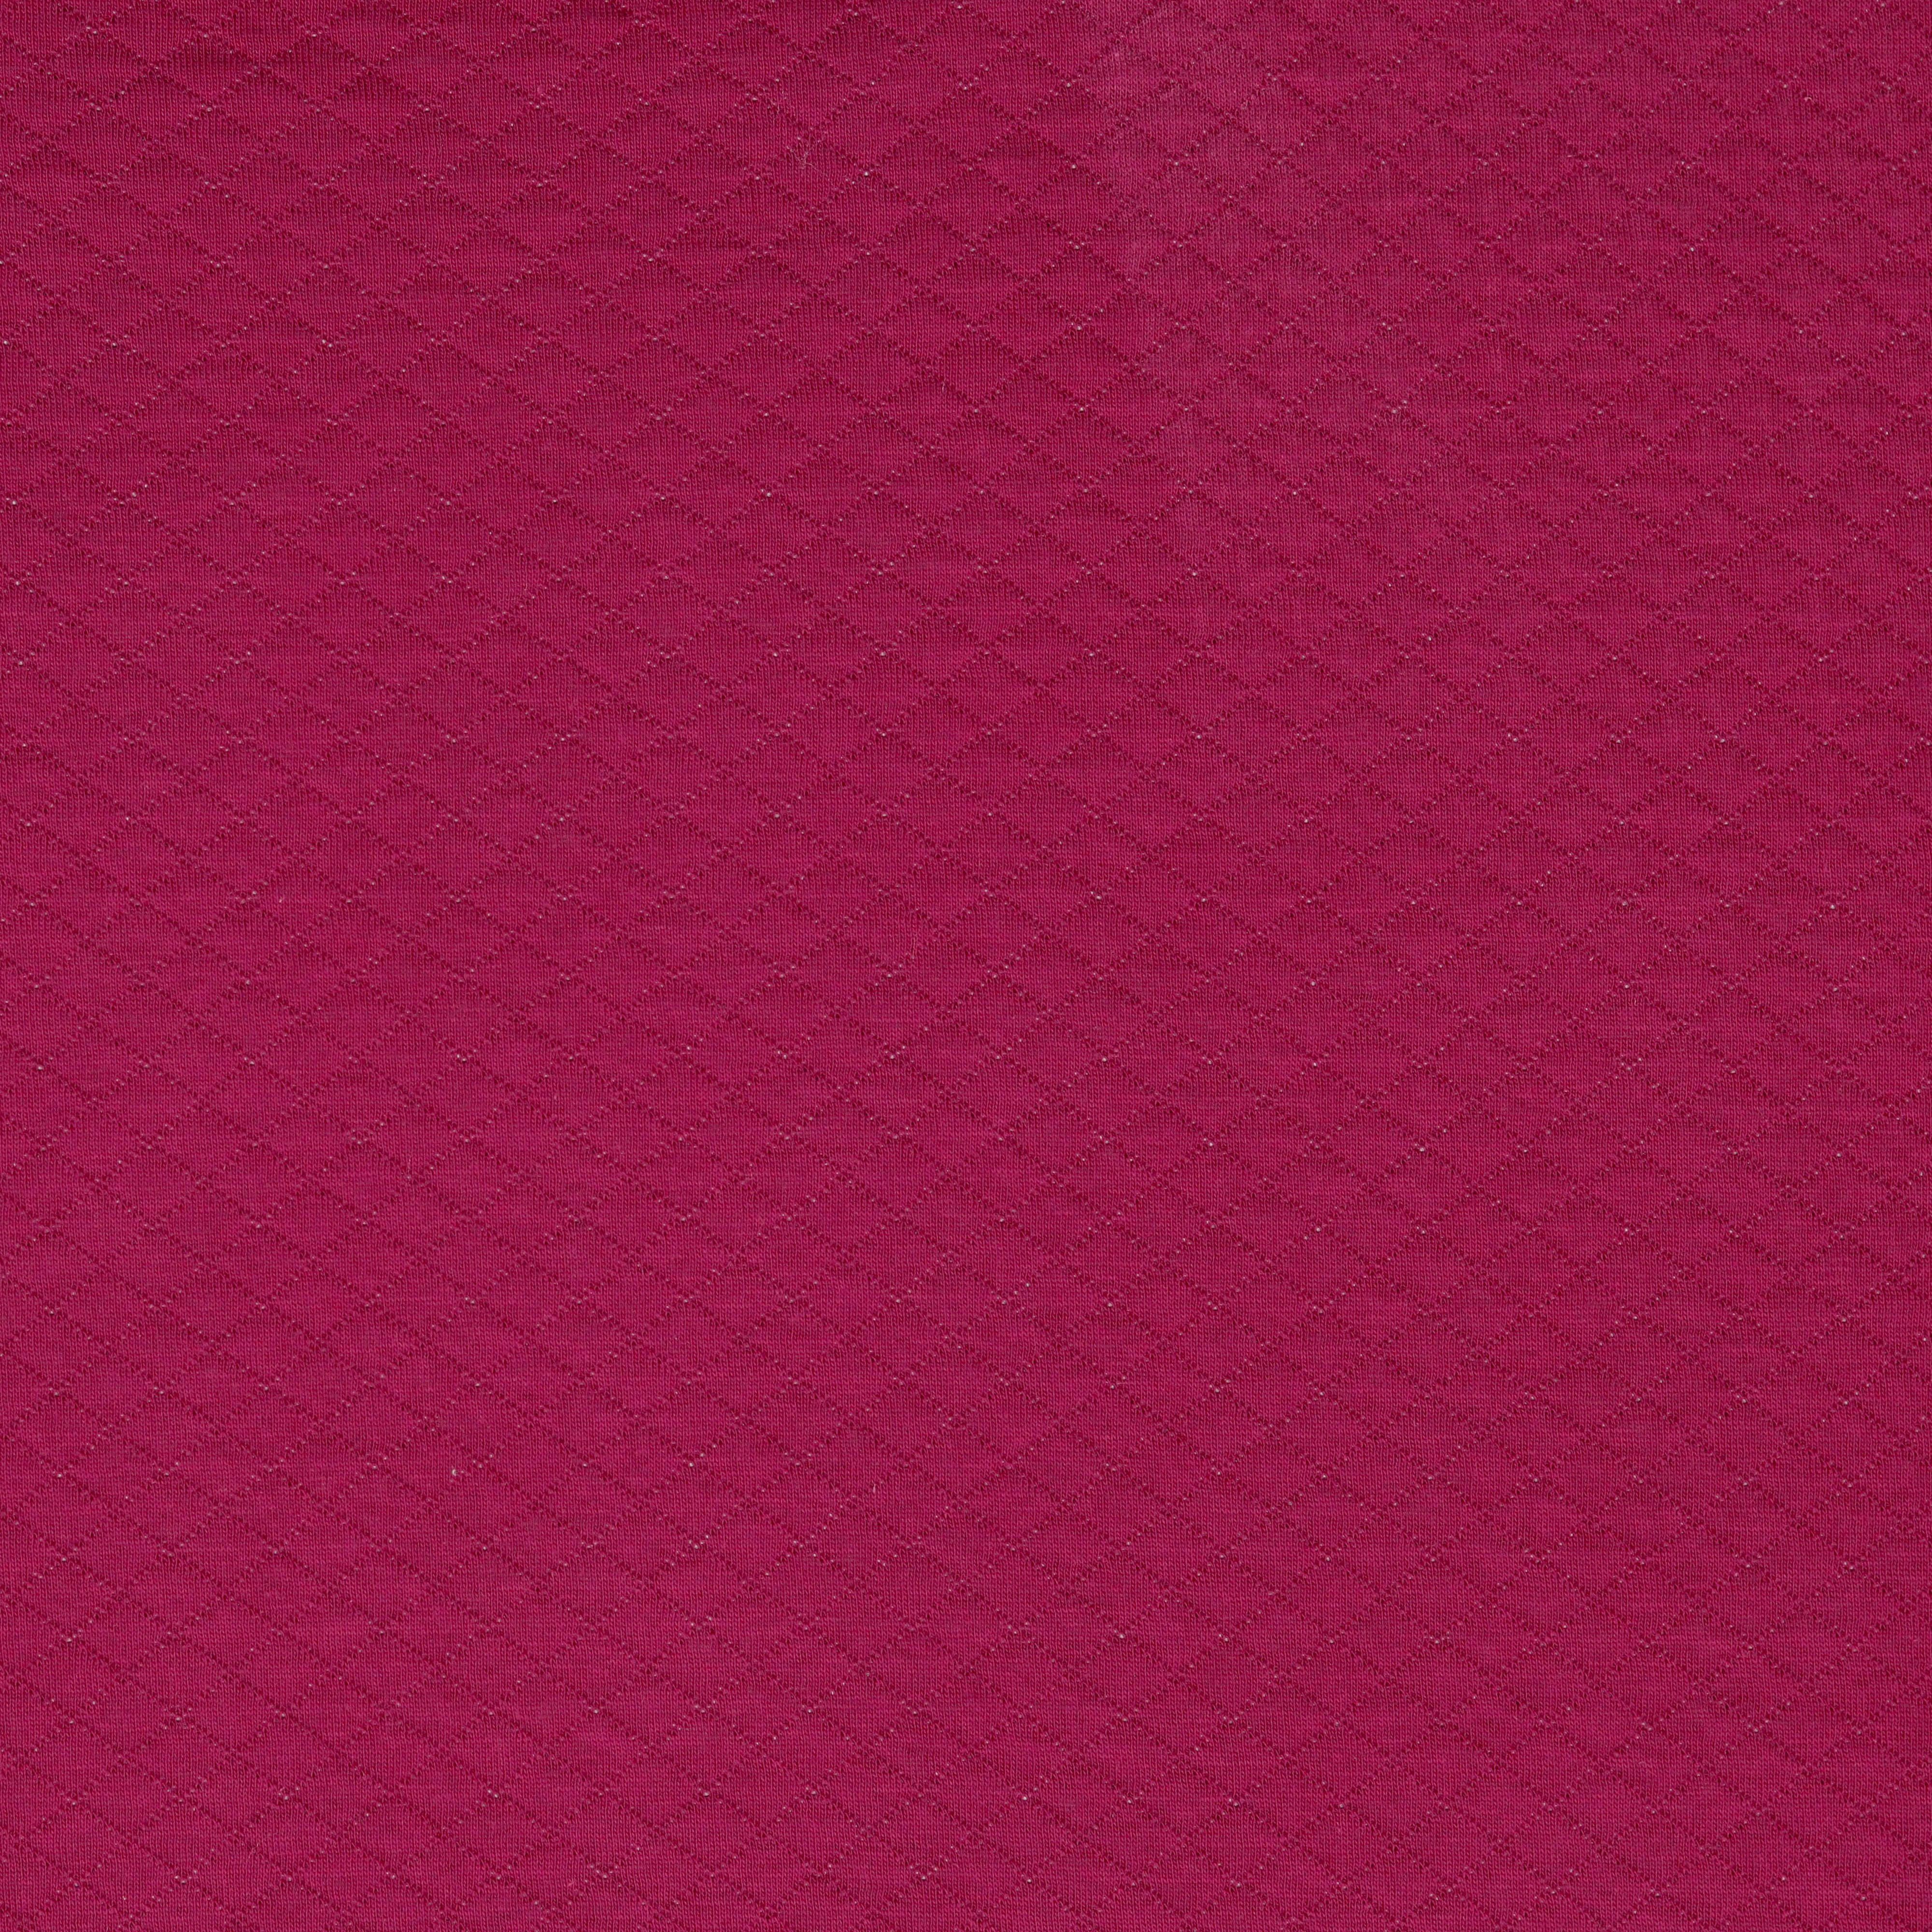 REMNANT 1.02 Metre - Diamond Jacquard Quilted Knit in Cerise Pink